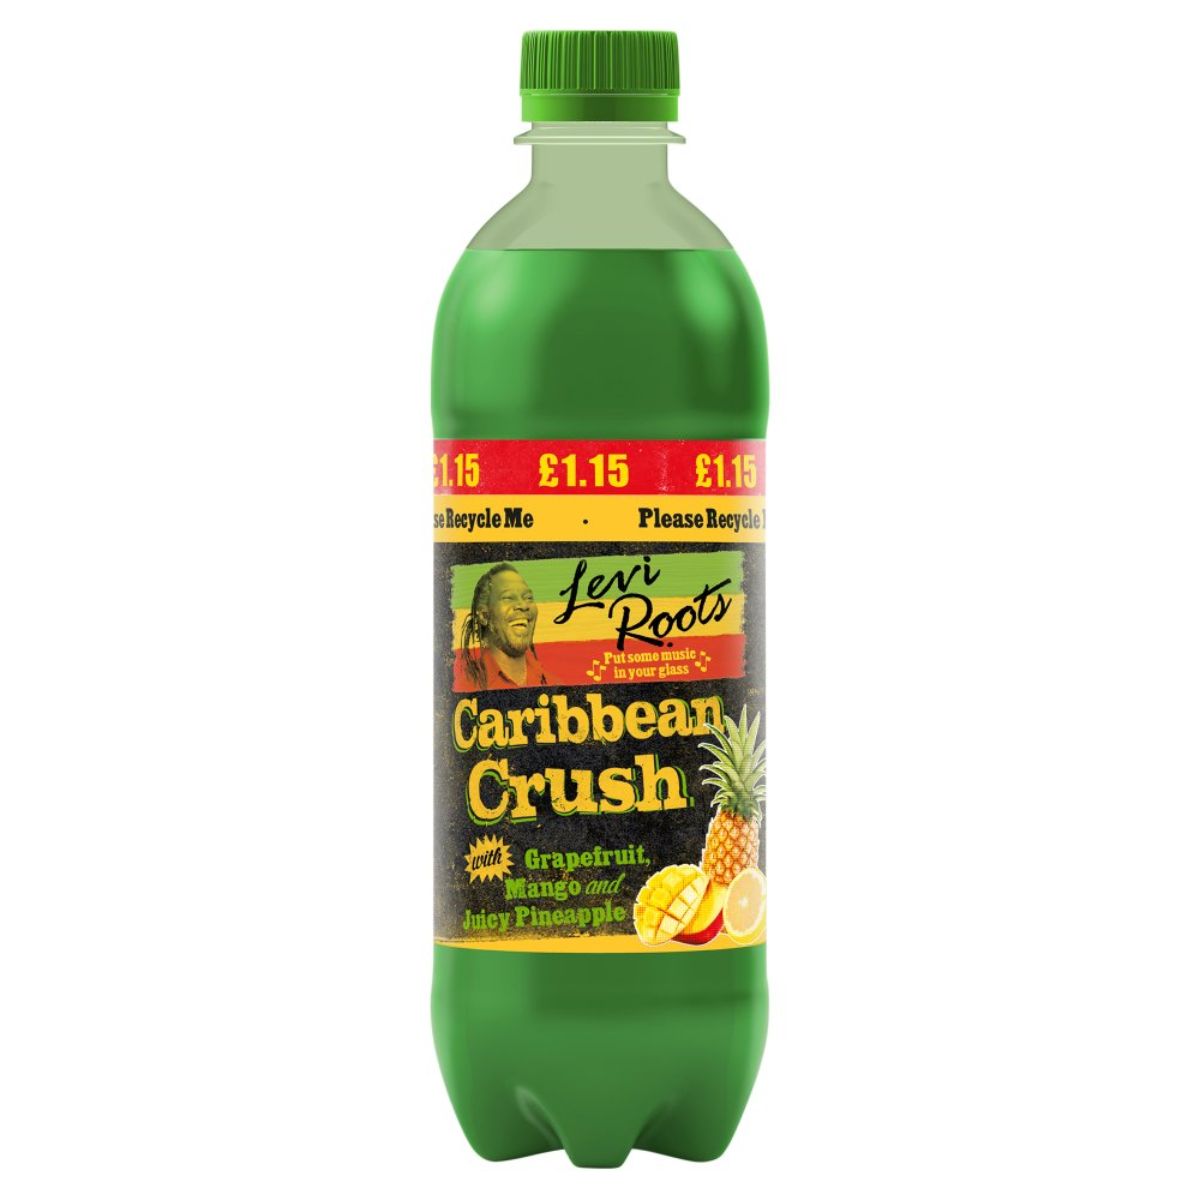 A bottle of Levi Roots - Caribbean Crush mango and Pineapple - 500ml on a white background.